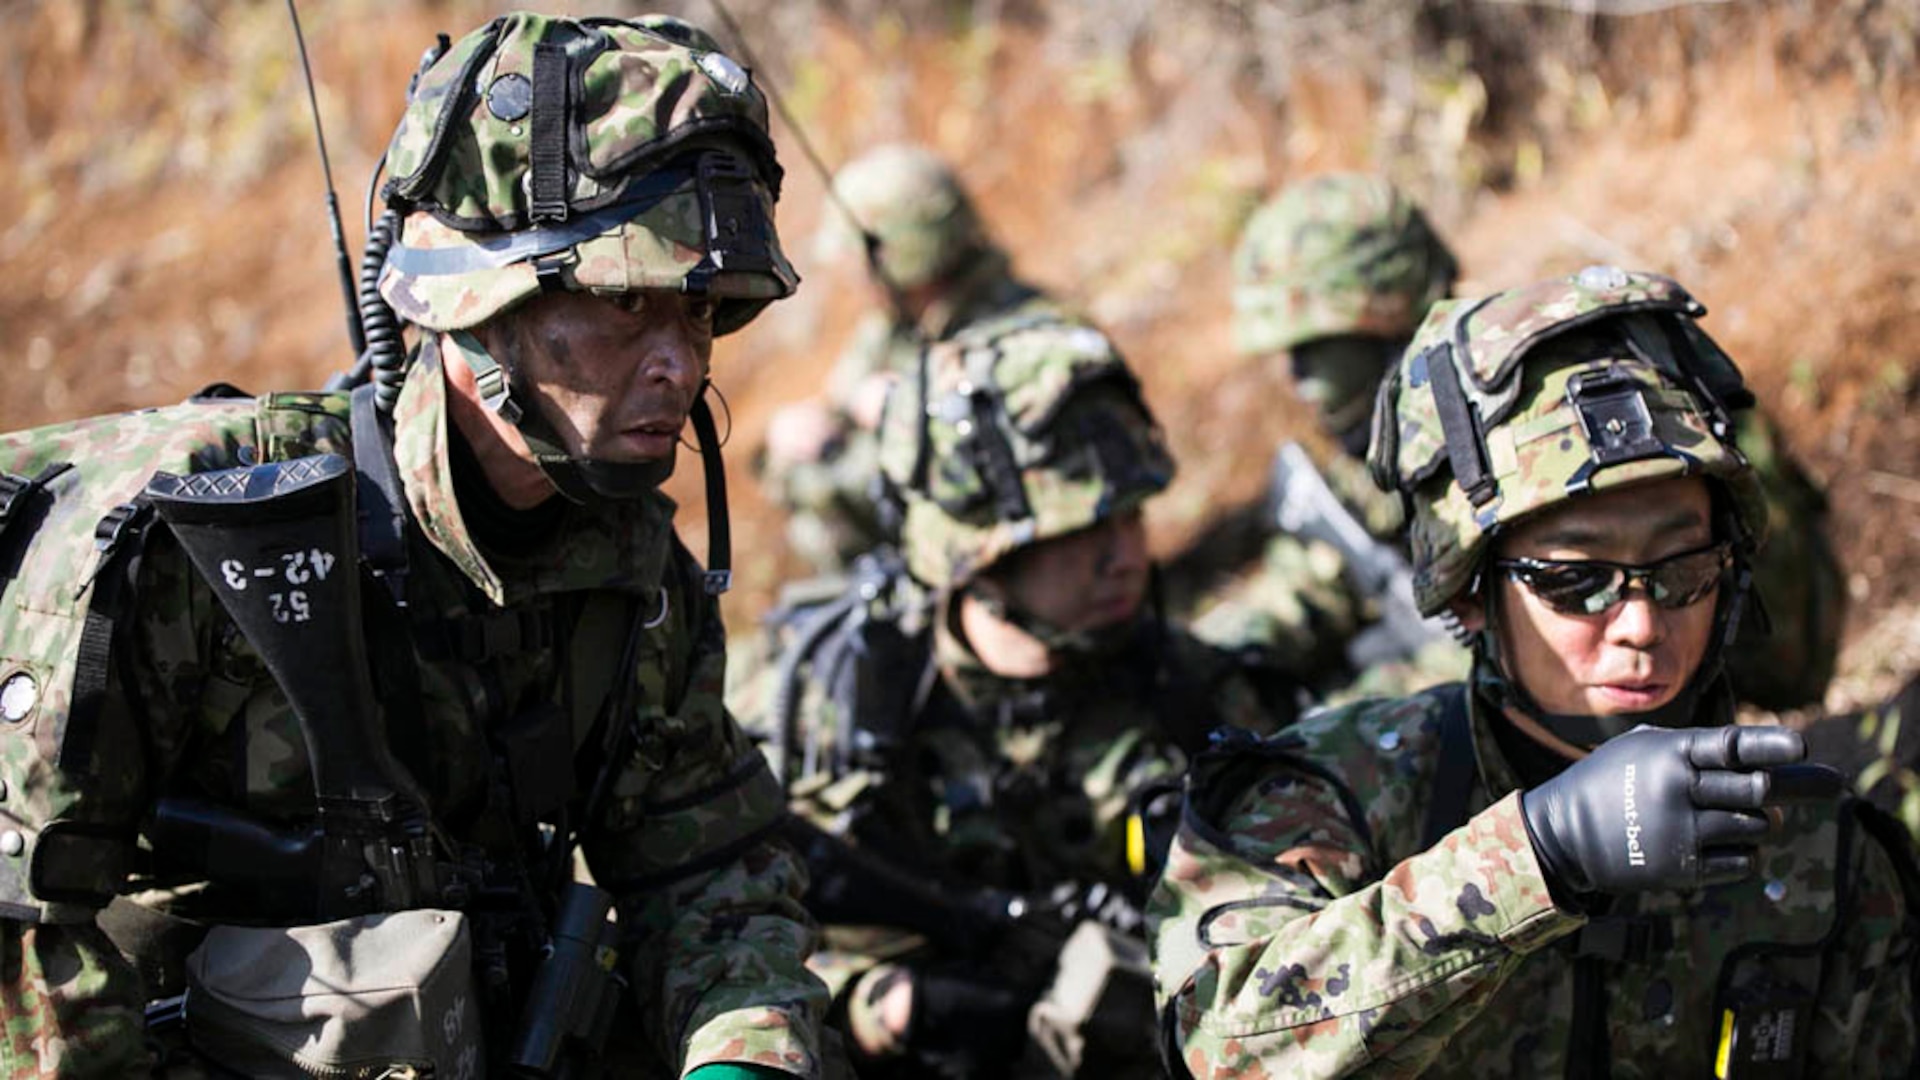 YAMATO,Japan (Dec. 9, 2014) - Japan Ground Self-Defense Force members discuss a plan of attack during Forest Light 15-1 at the Oyanohara Training Area.  Forest Light is a routine, semi-annual exercise designed to enhance the U.S. and Japan military partnership, solidify regional security agreements and improve individual and unit-level skills. The JGSDF members are with 42nd Regiment, 8th Division, Western Army.   141209-M-GX711-108